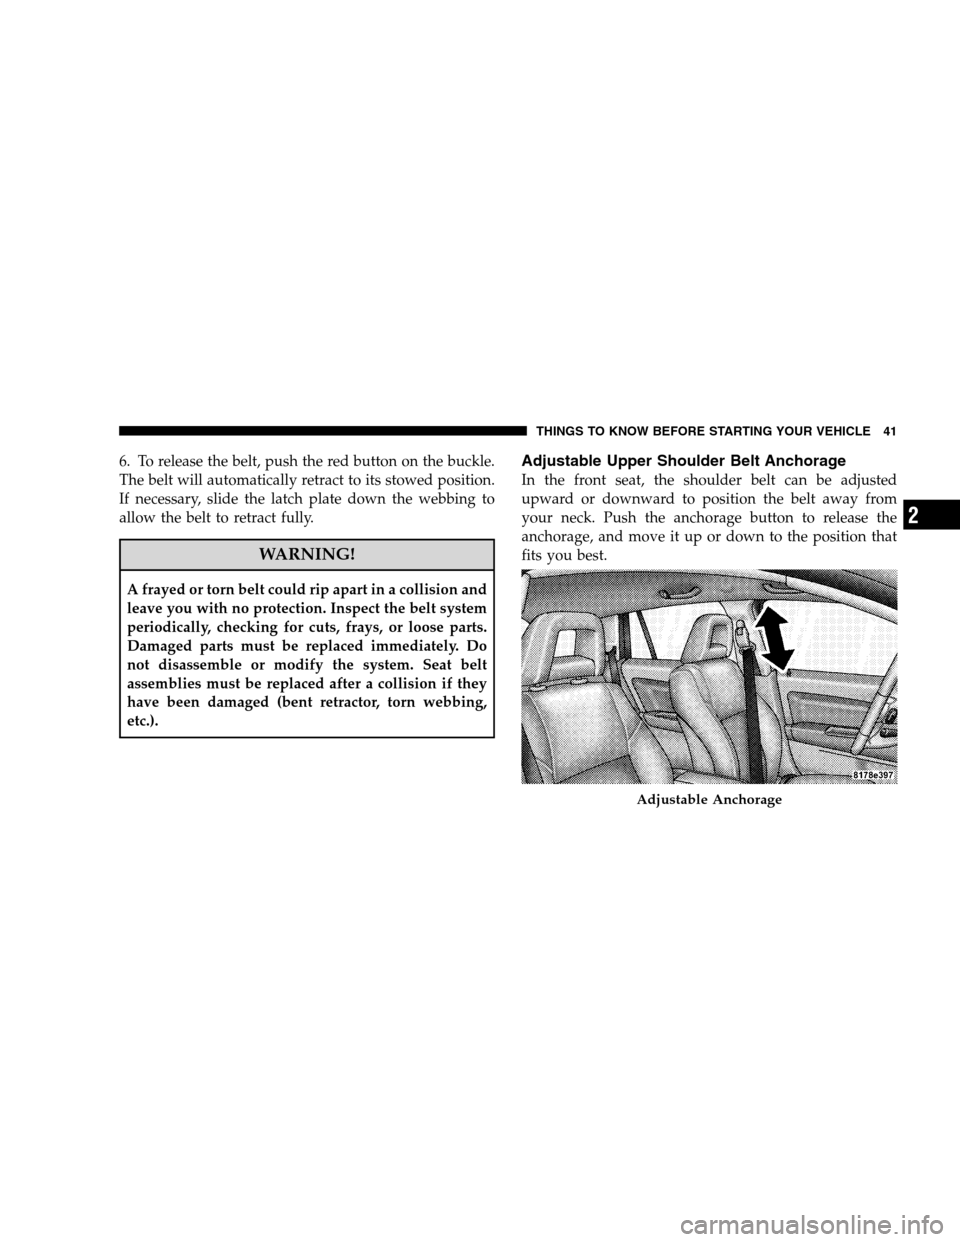 JEEP PATRIOT 2008 1.G User Guide 6. To release the belt, push the red button on the buckle.
The belt will automatically retract to its stowed position.
If necessary, slide the latch plate down the webbing to
allow the belt to retract